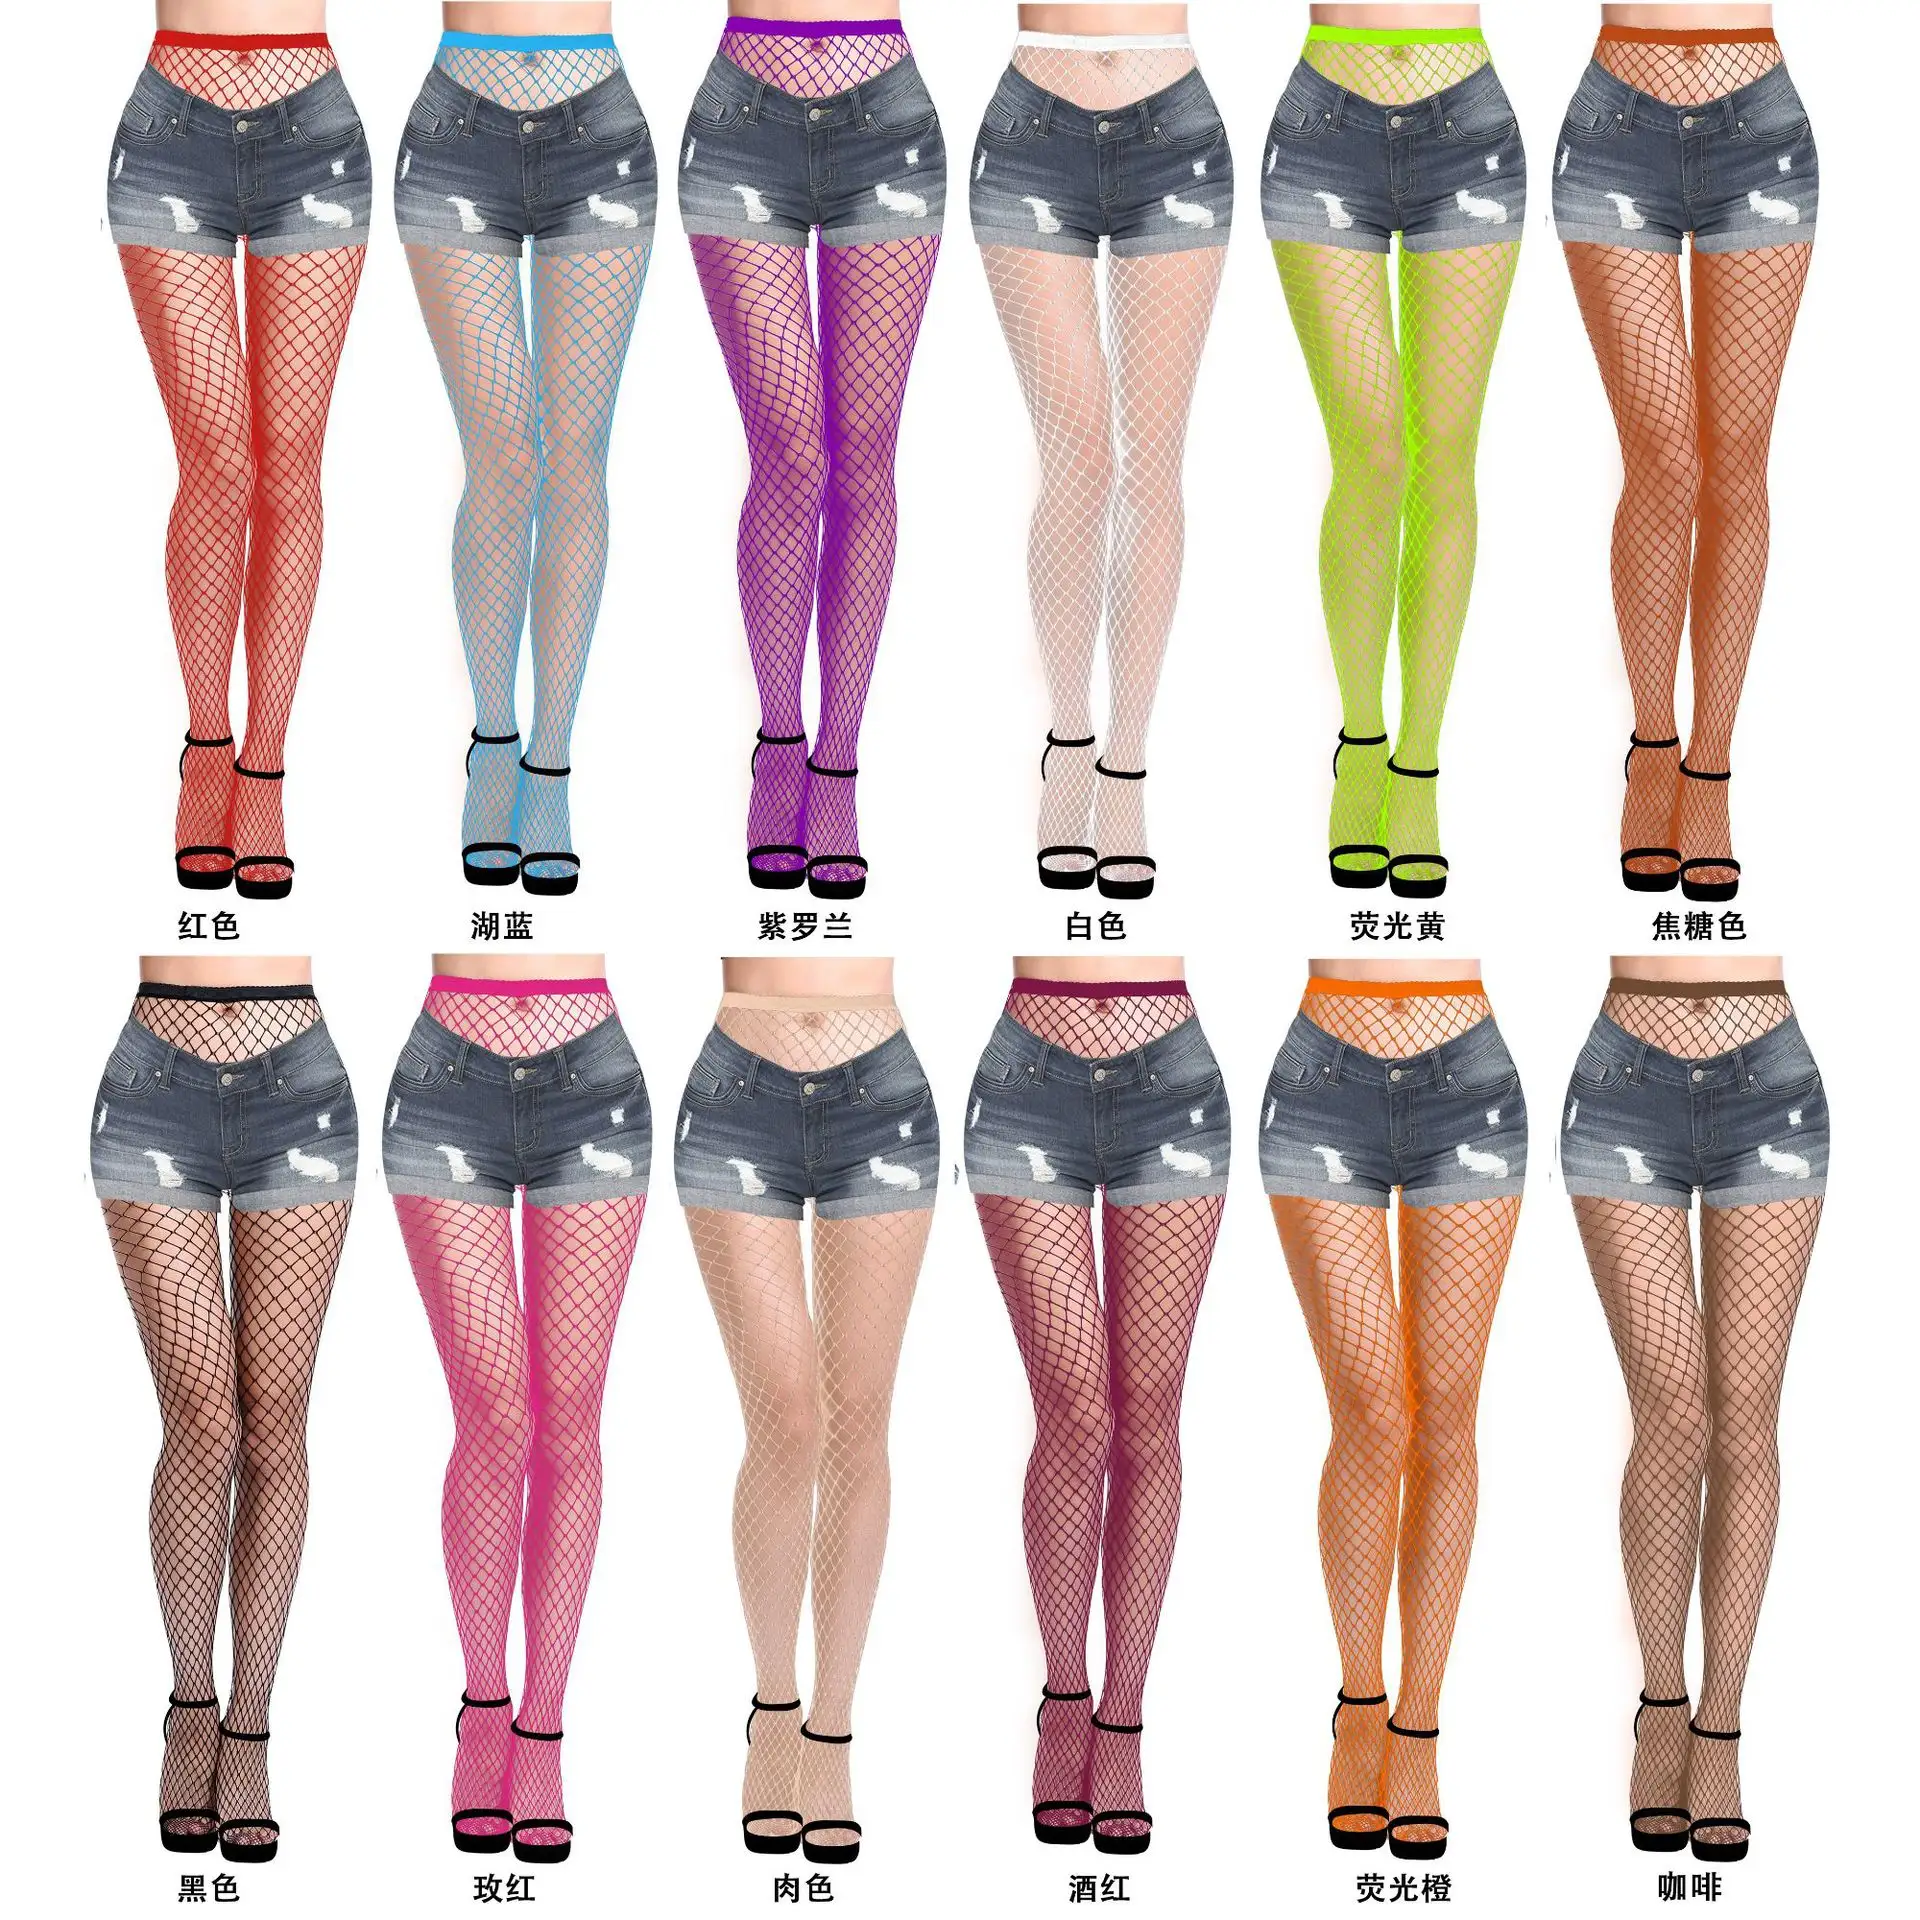 cheaper price sexy ladies fishnet pantyhose plus size high waist tights